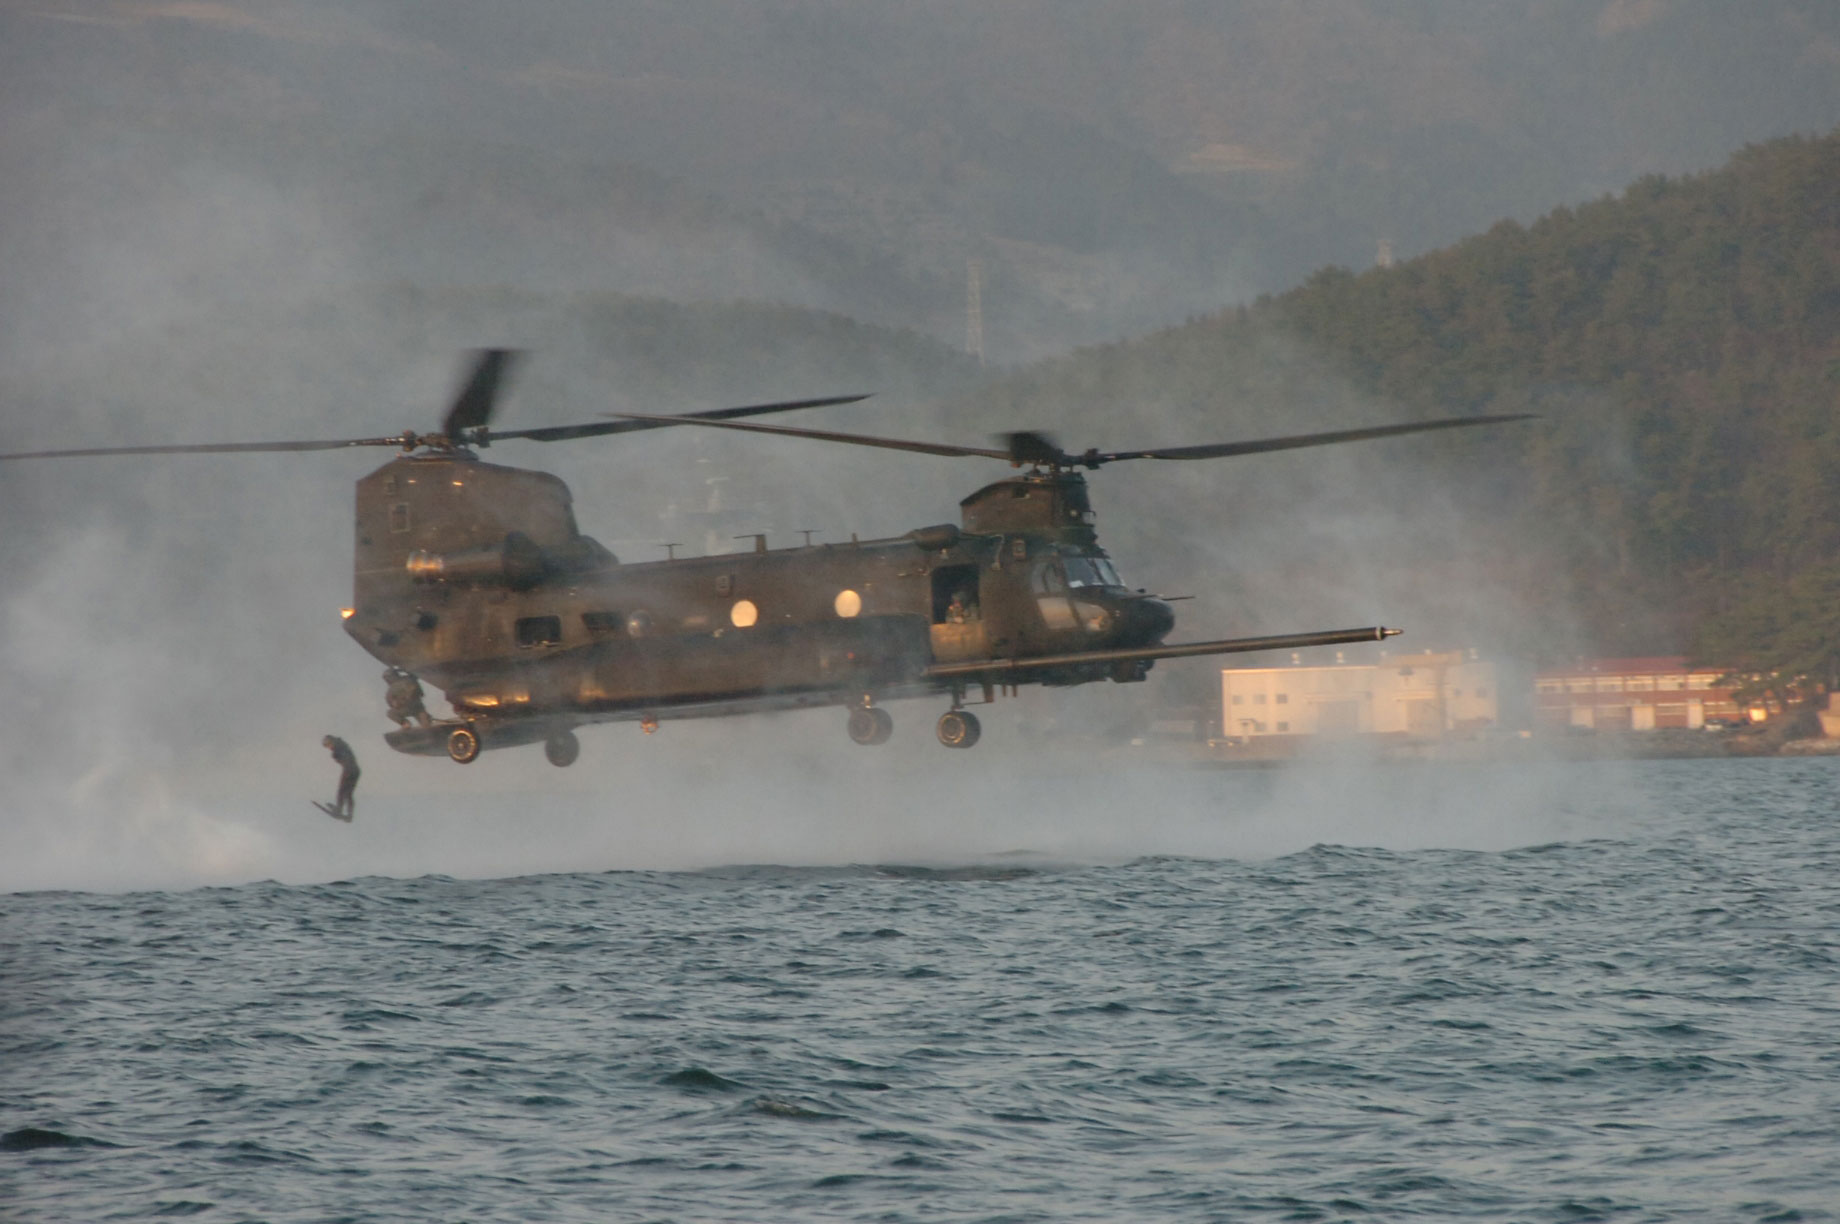 MH-47 Helicopter | Special Forces